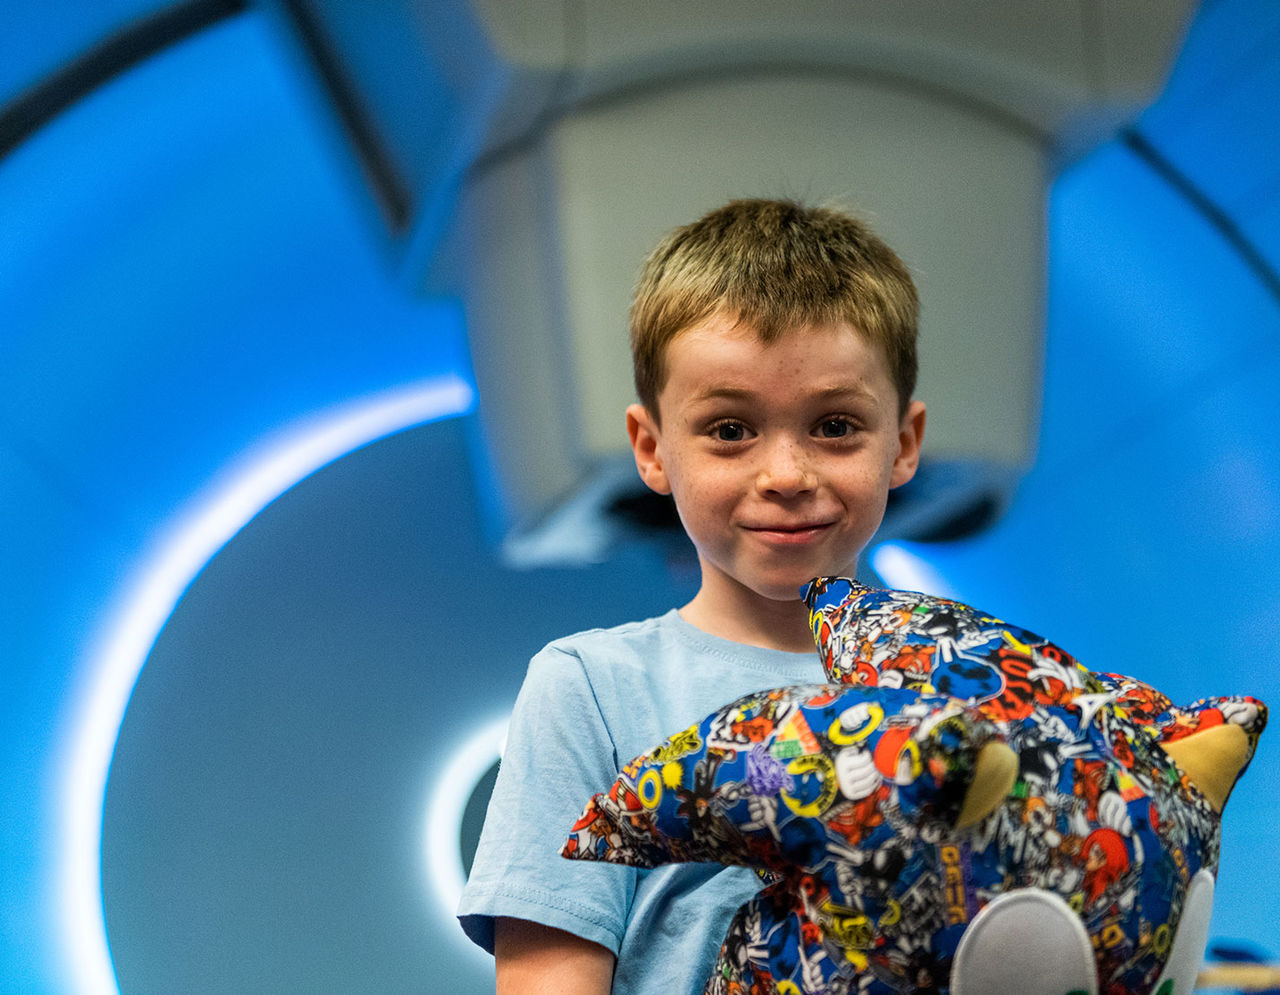 A young boy holding stuffed toy in front of imaging machine 